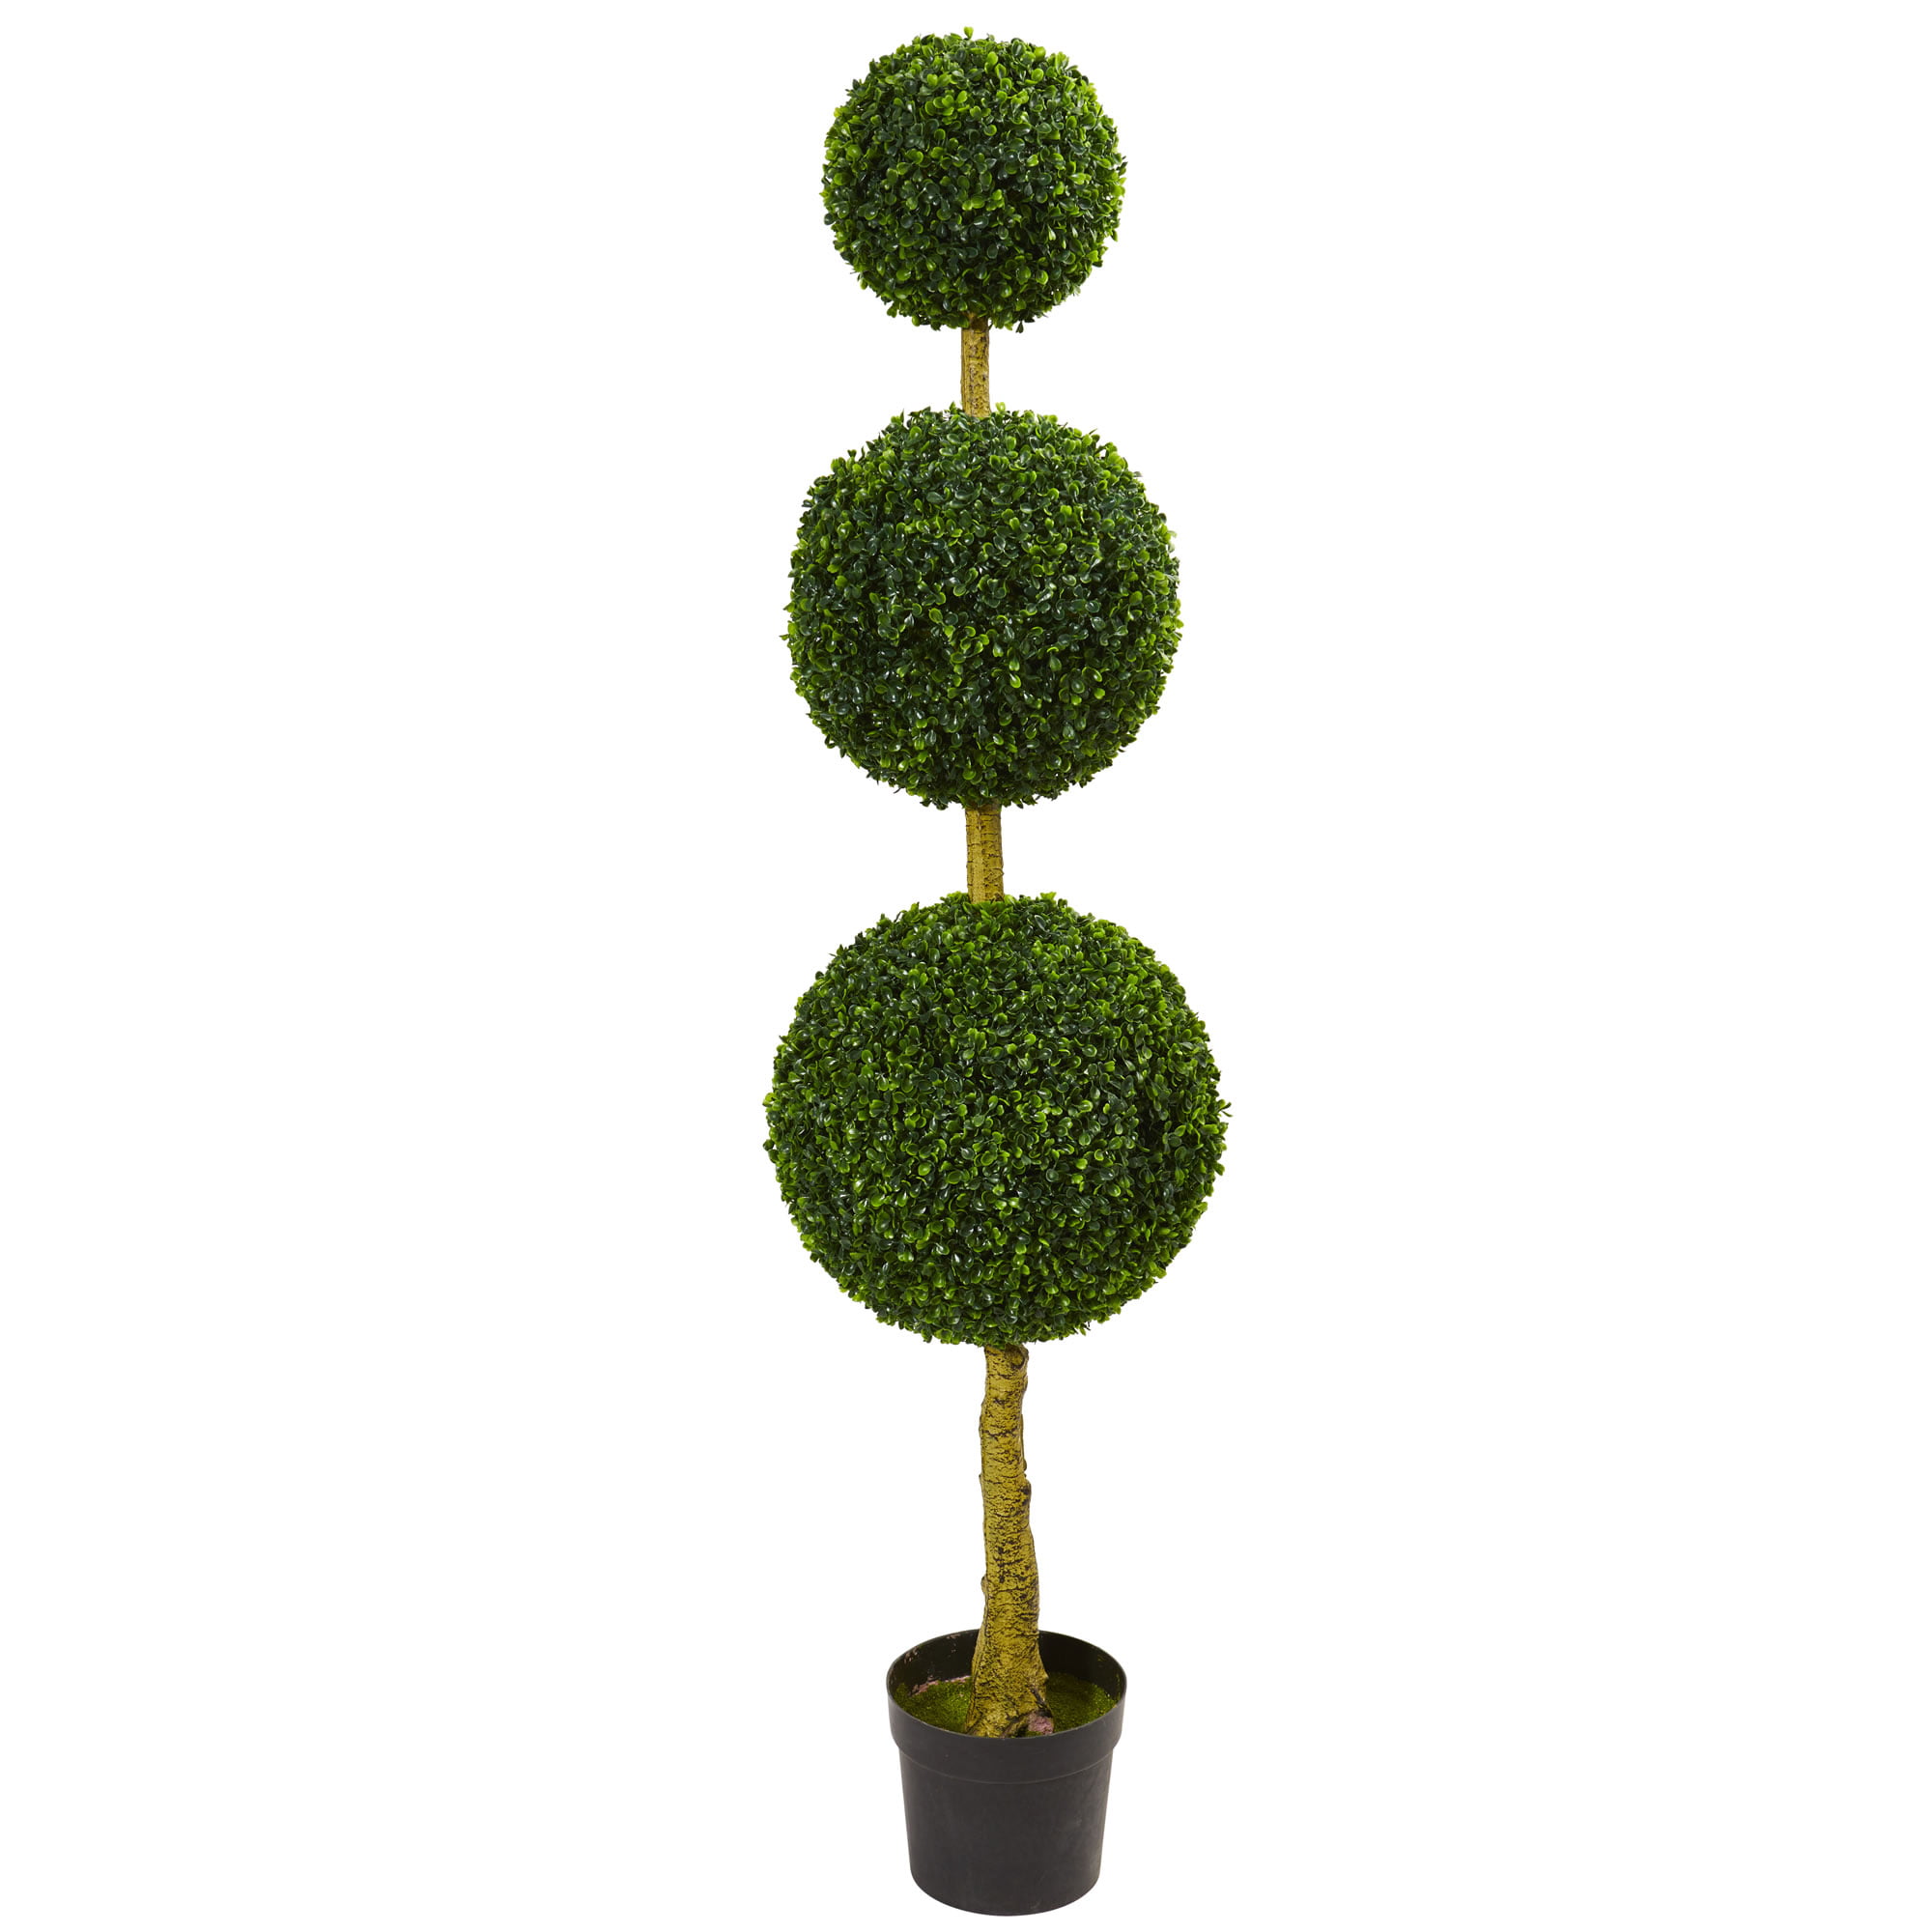 Details about   Realistic Potted Topiary Tree In/Outdoor Garden Artificial Plant Bush Boxwood 